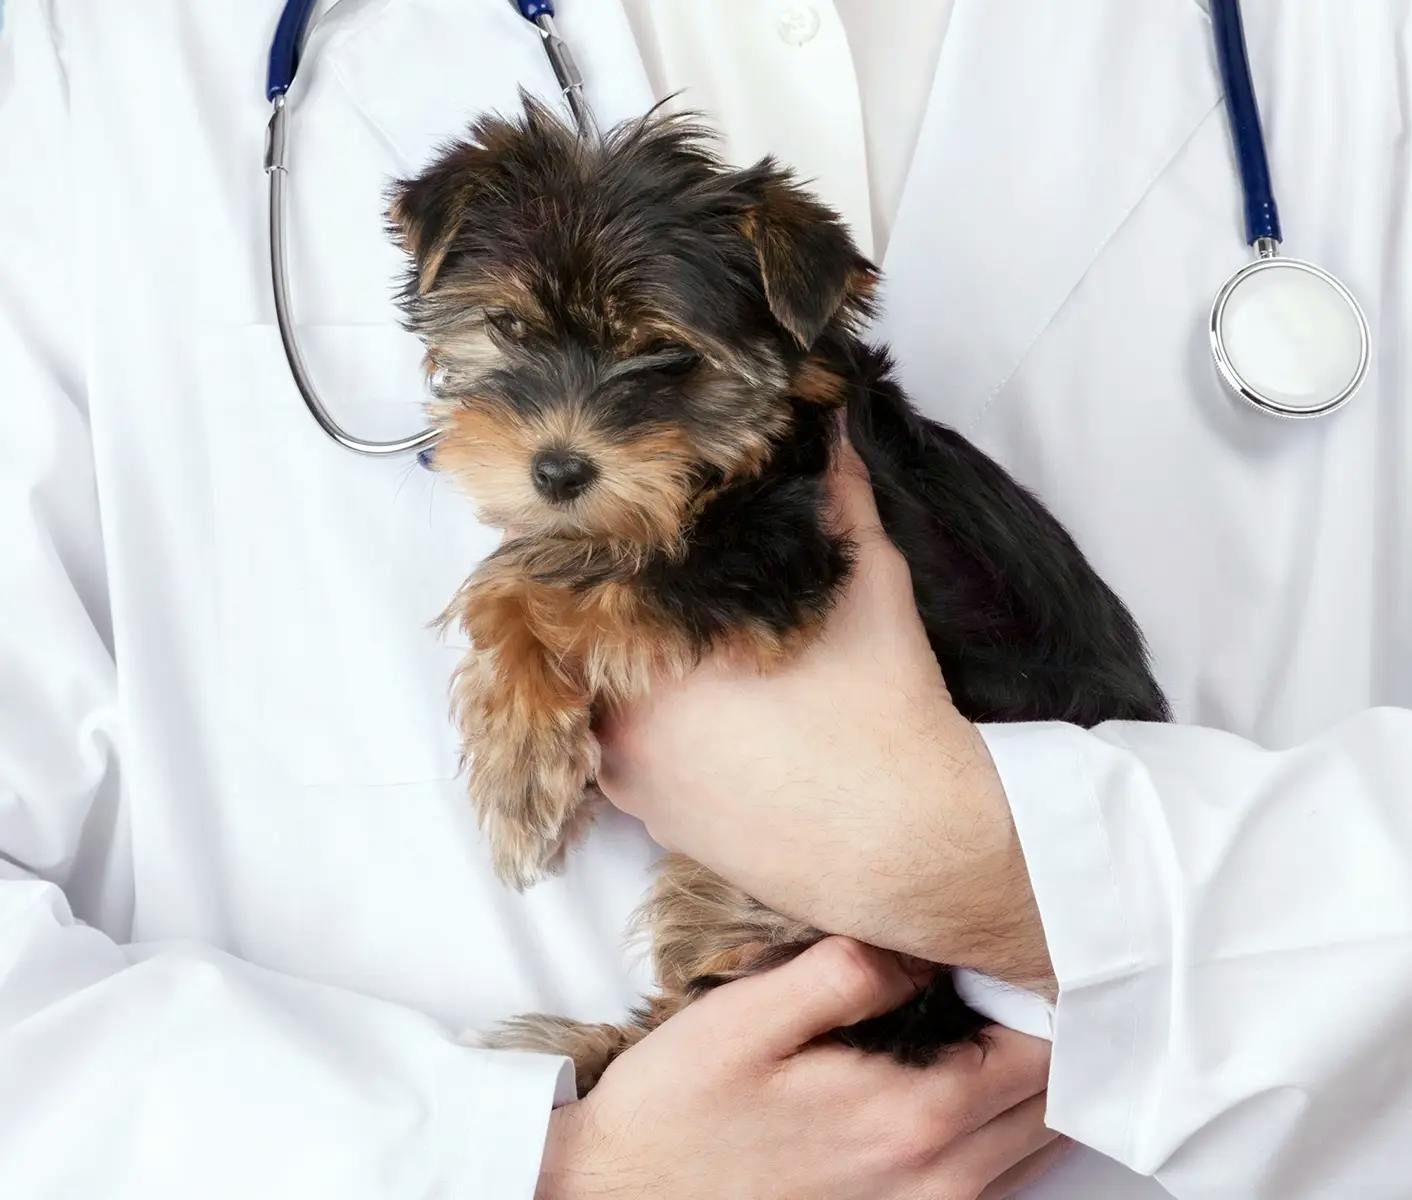 vet holding a puppy